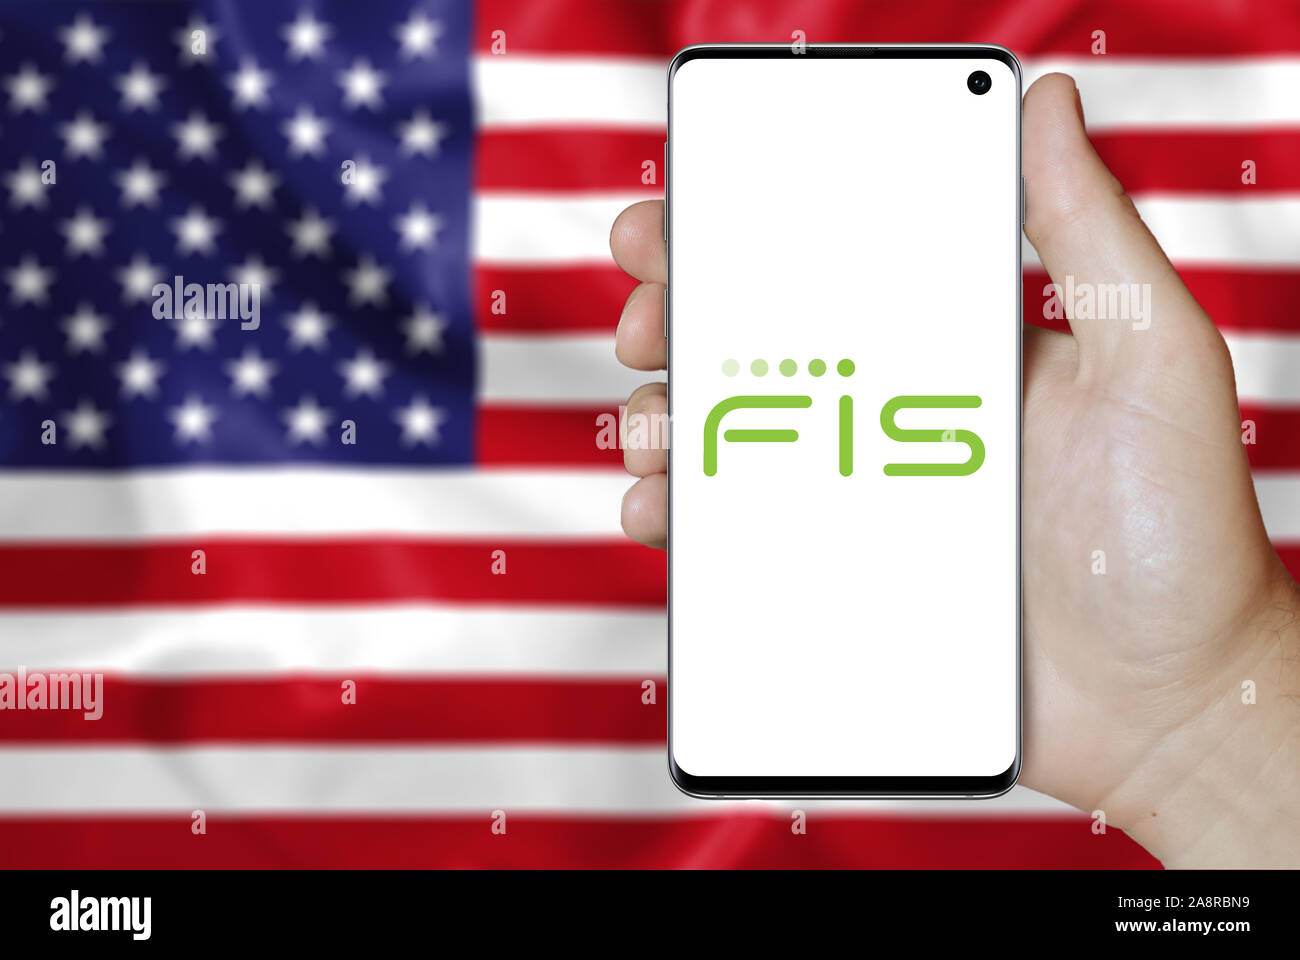 Logo of public company Fidelity National Information Services displayed on a smartphone. Flag of USA background. Credit: PIXDUCE Stock Photo